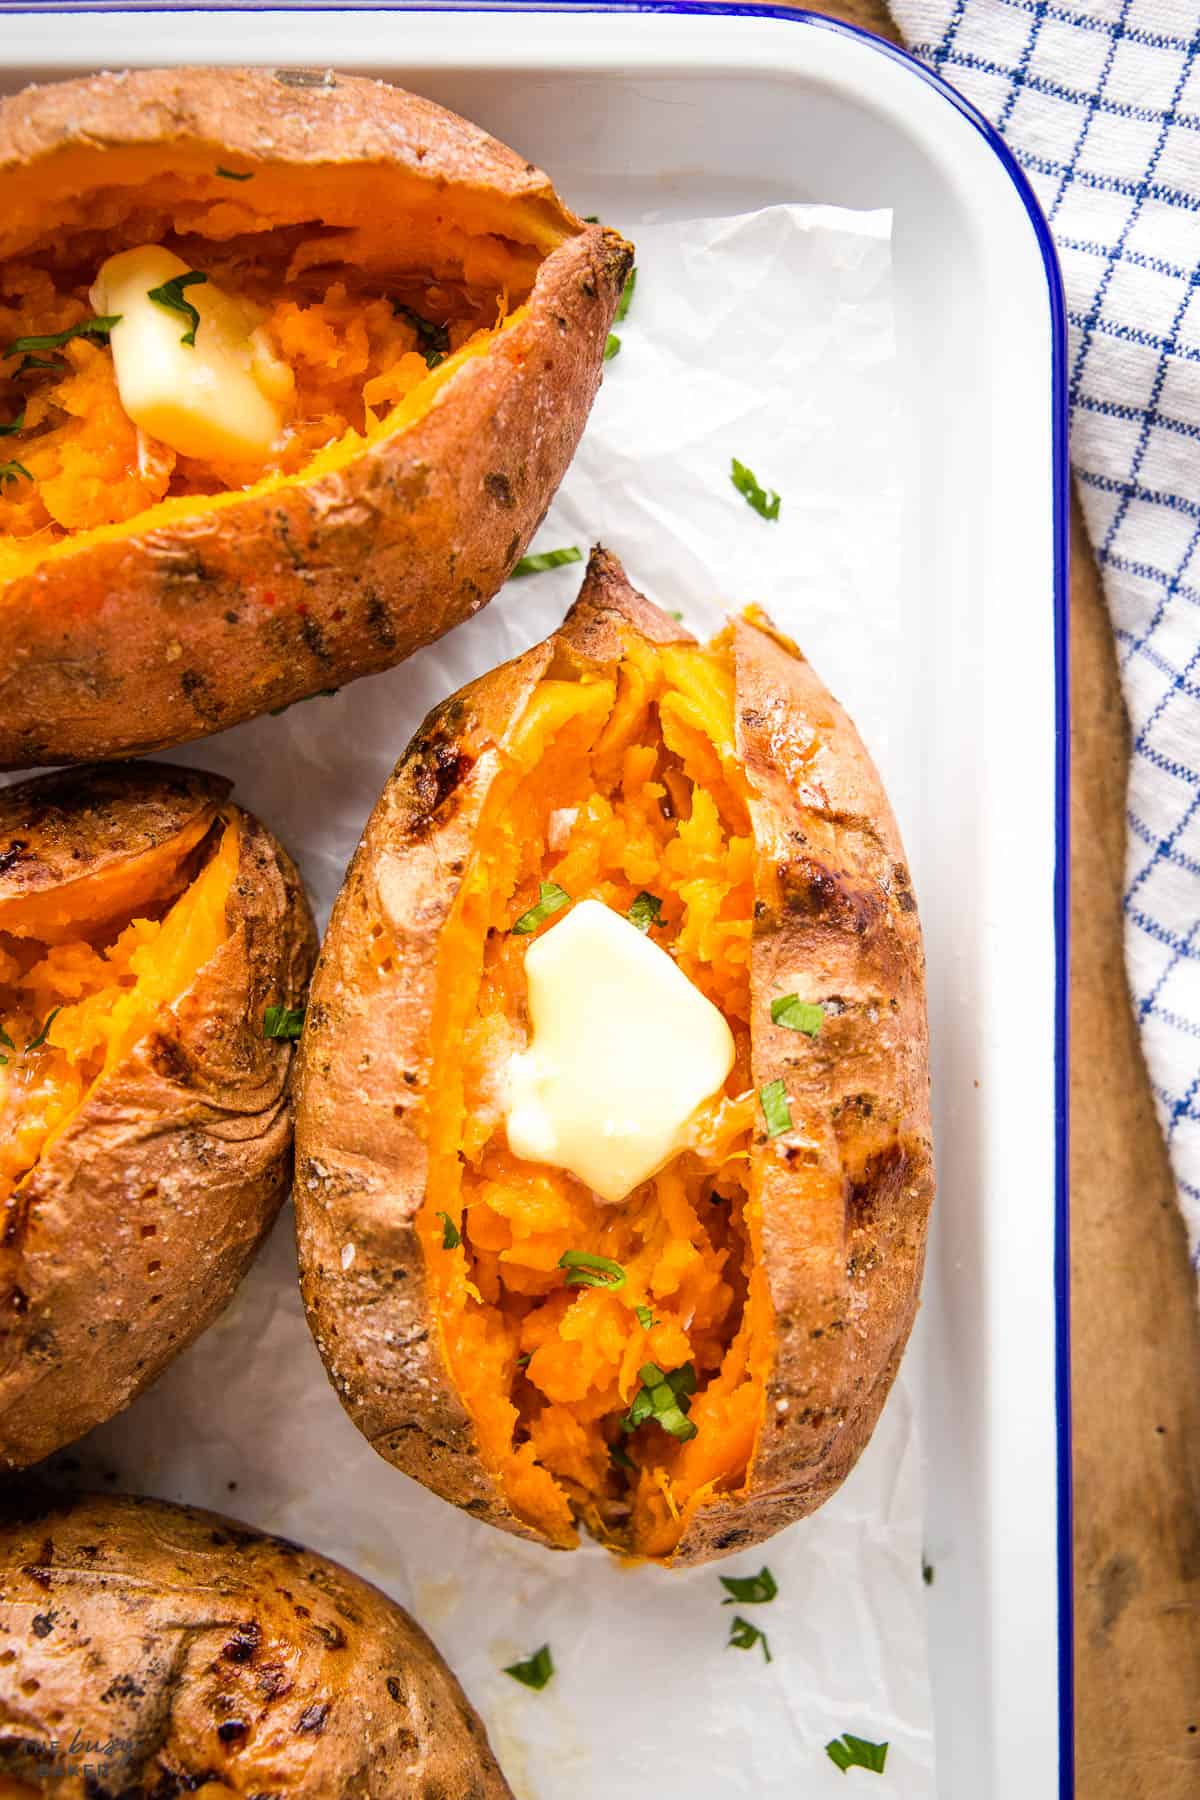 baked sweet potato with butter